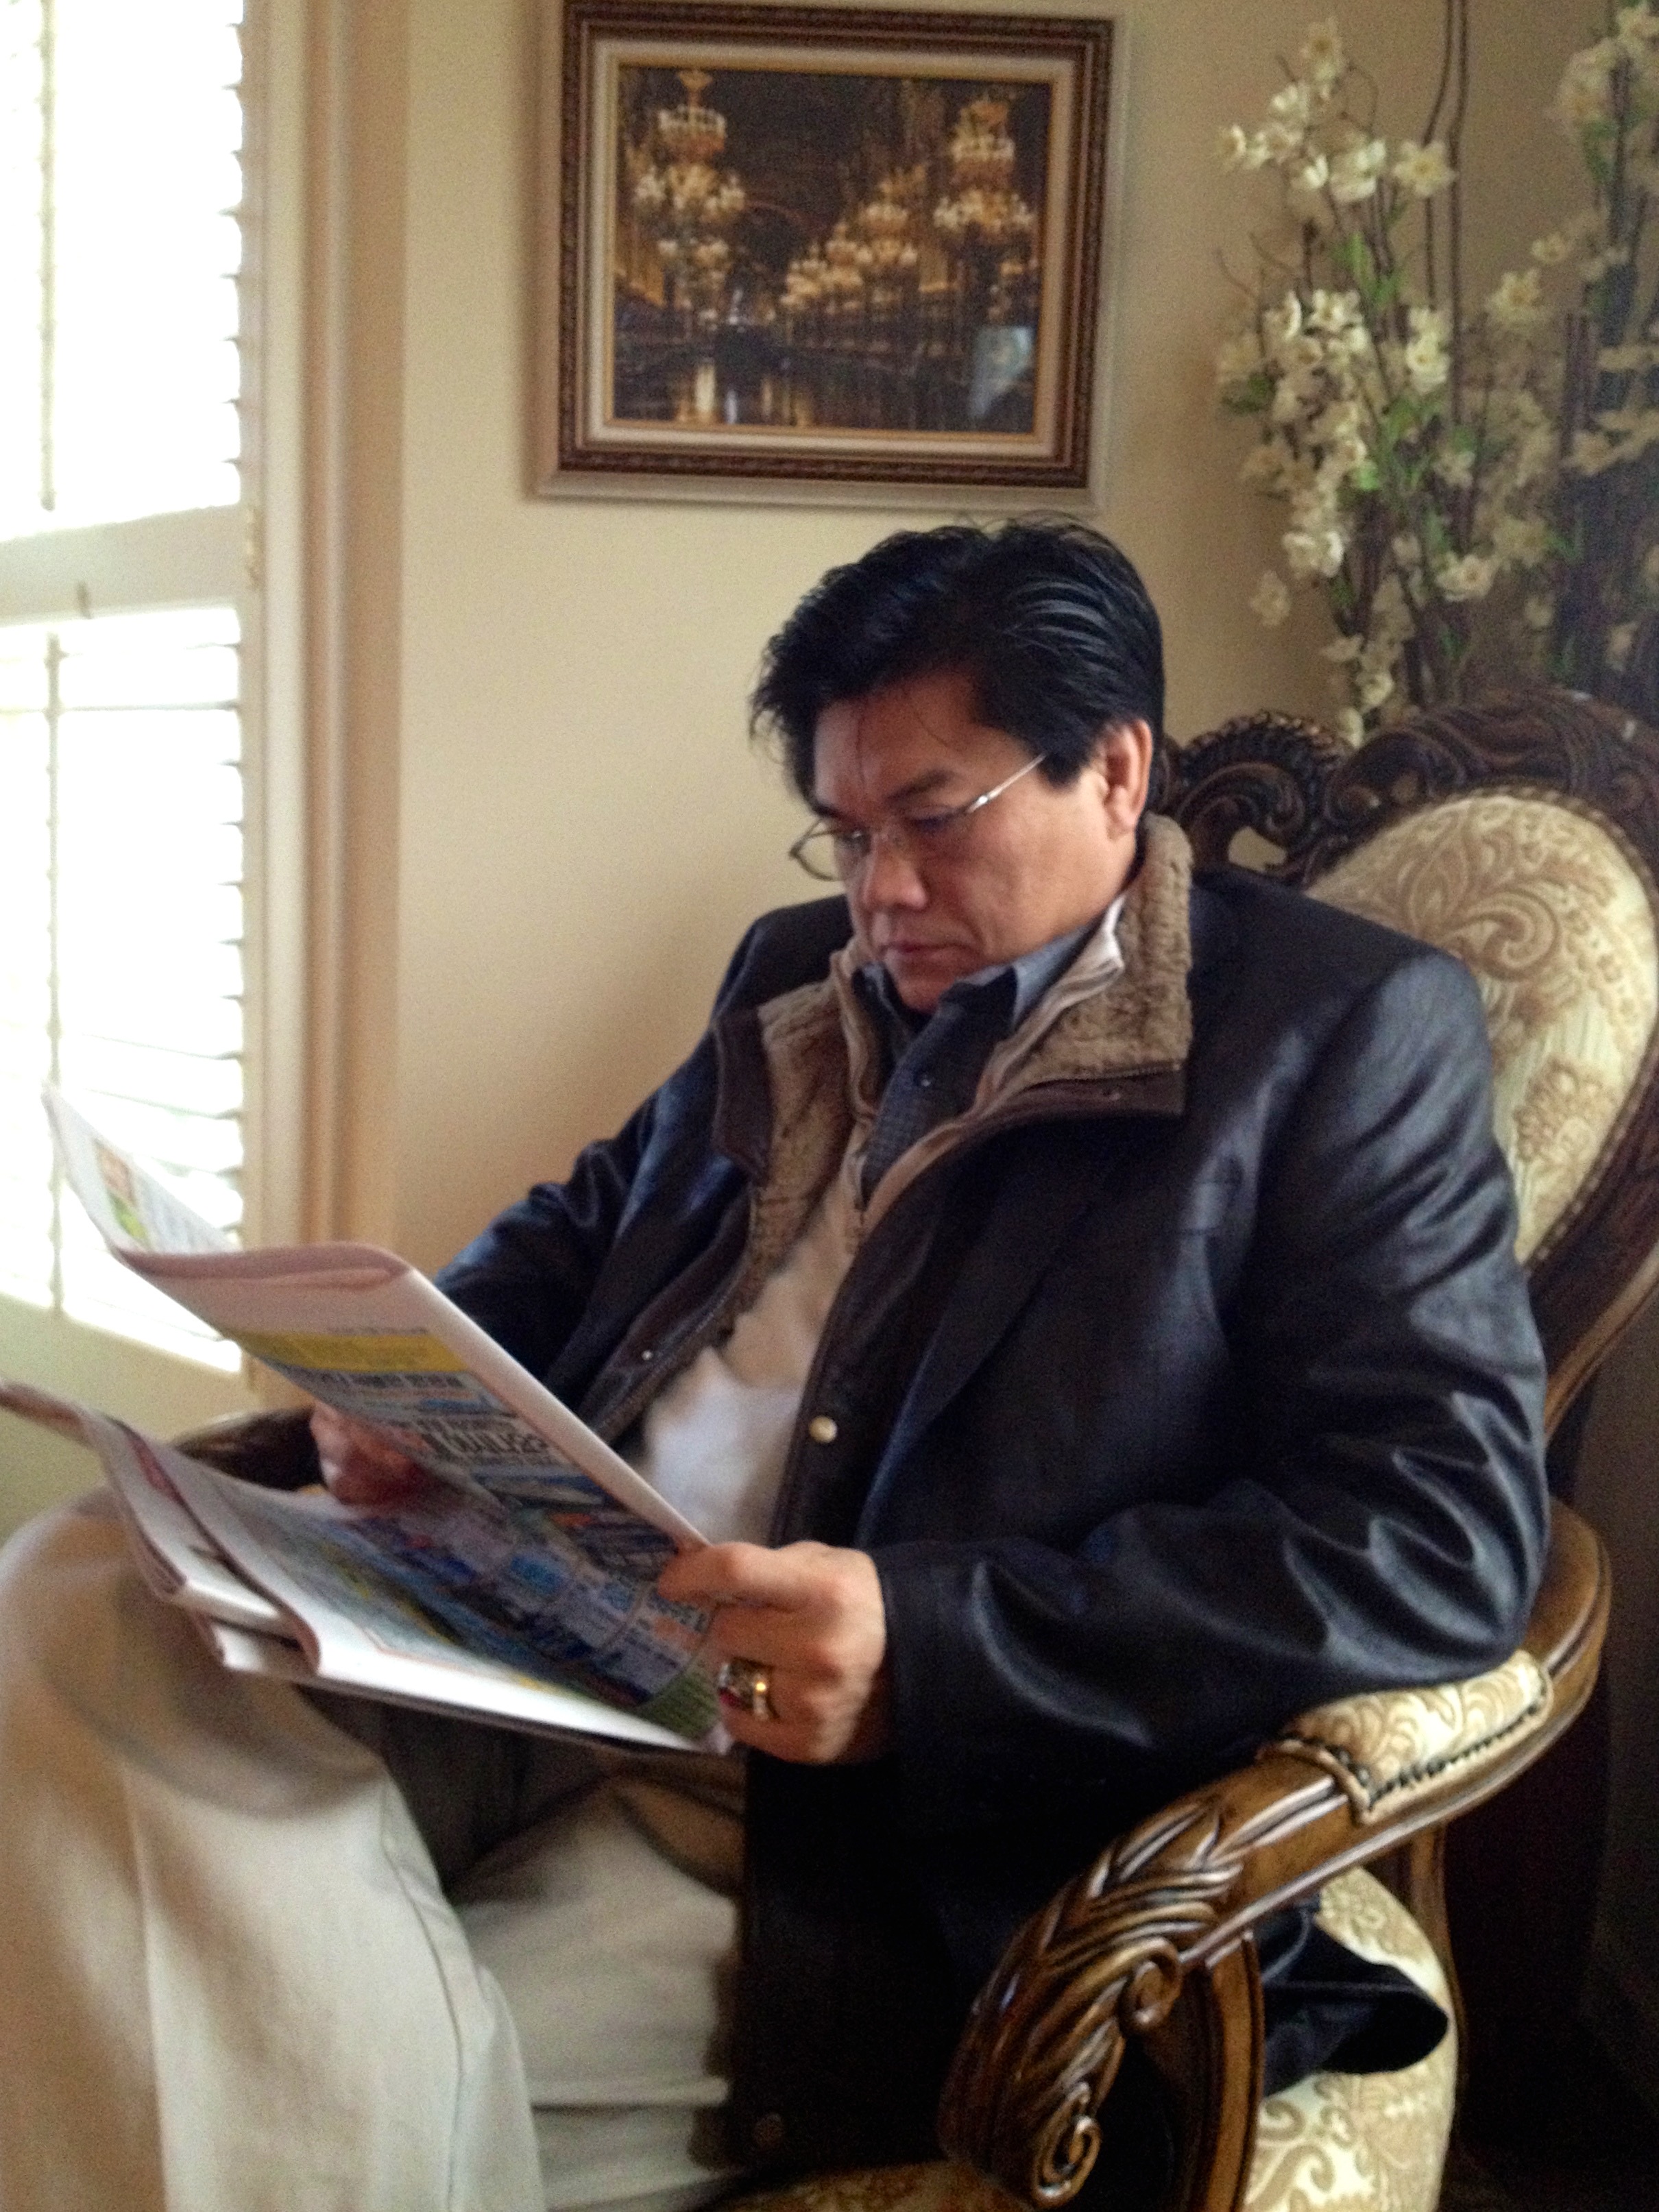 photo of hyung park reading the paper